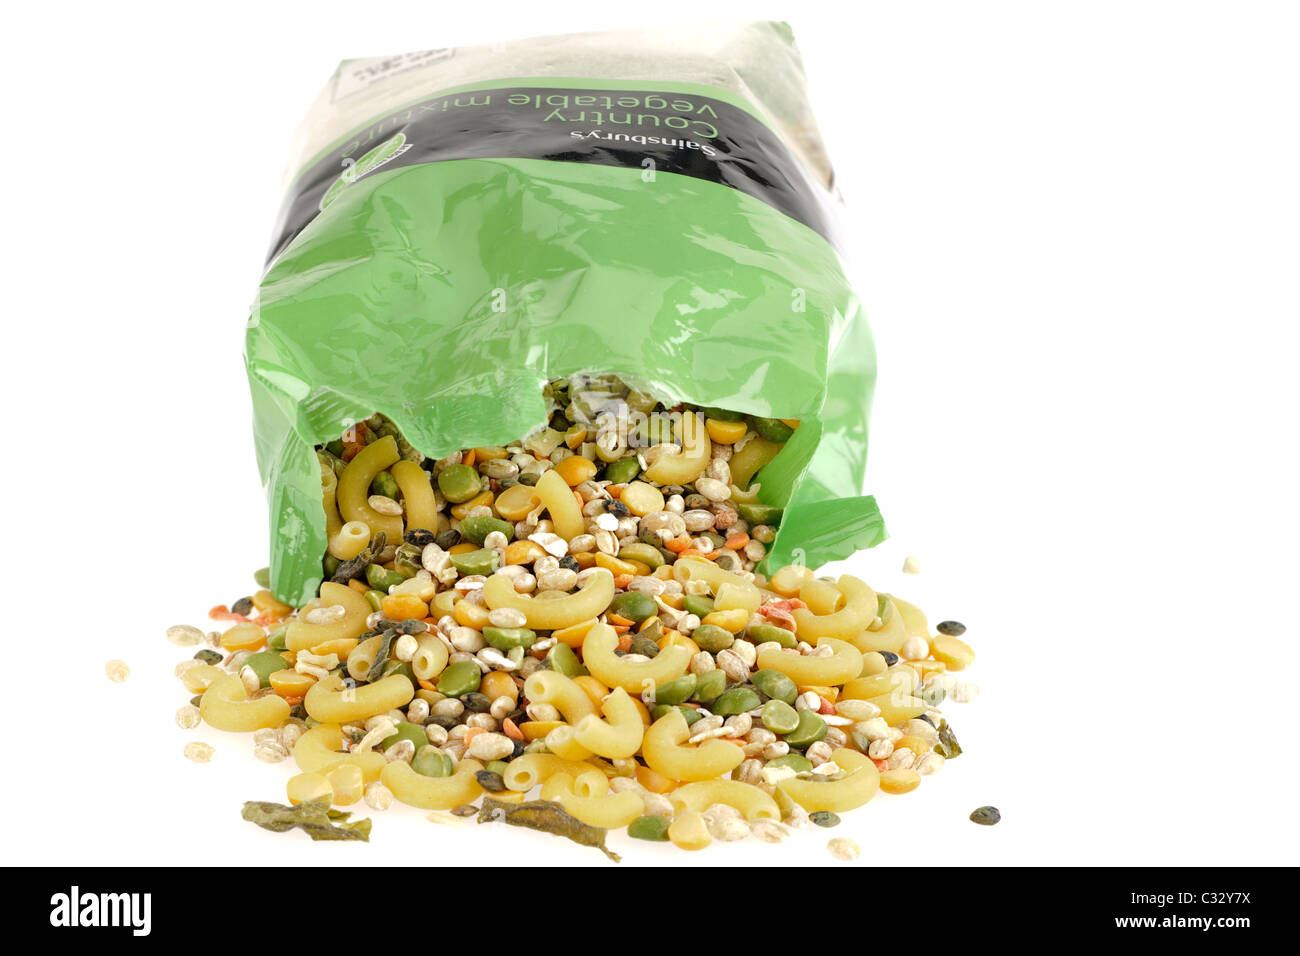 Bag of Sainsburys Country Vegetable Soup mixture spilling onto a white surface Stock Photo